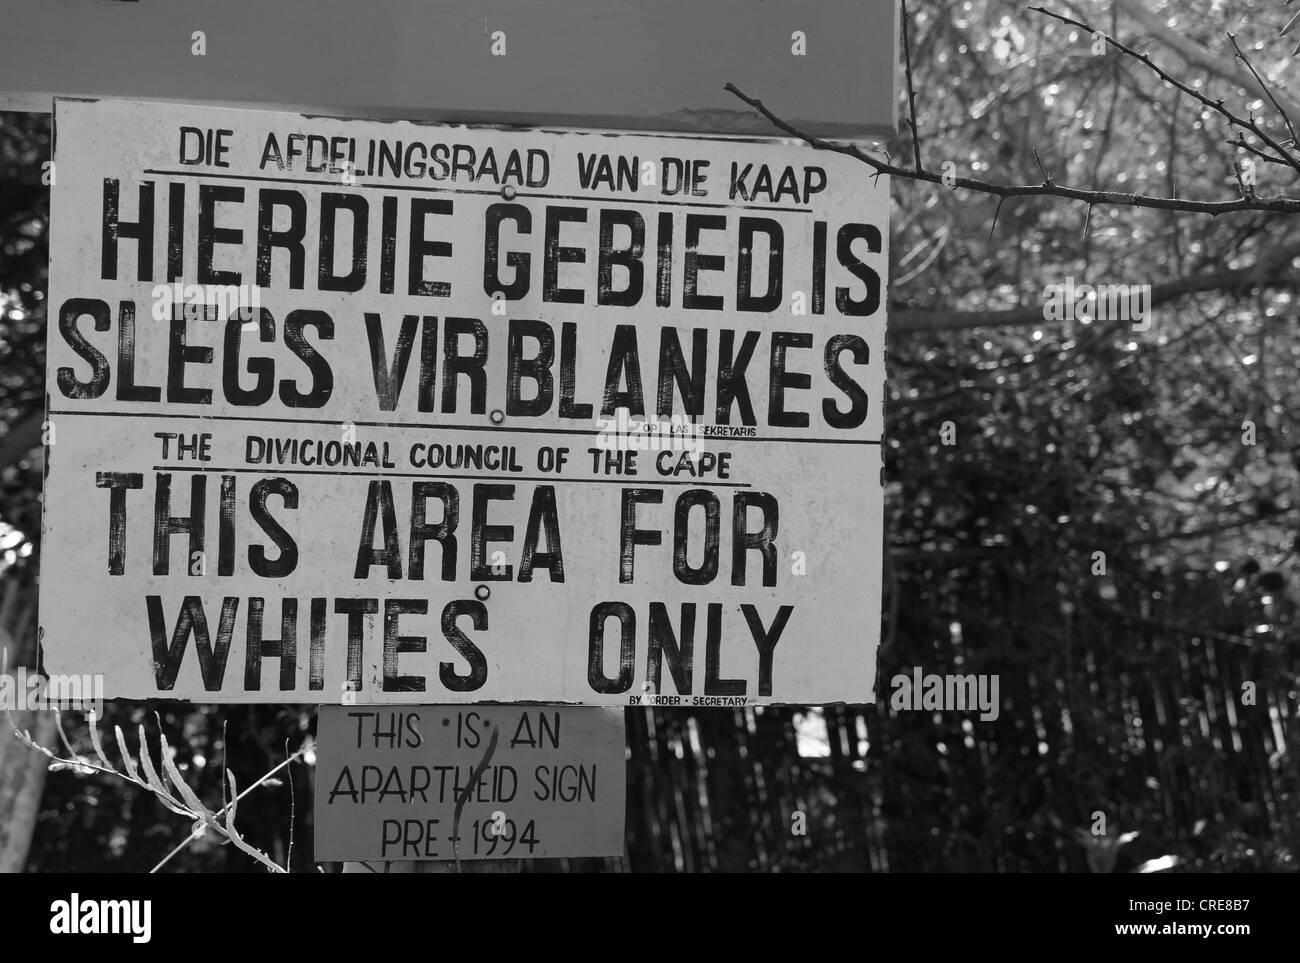 Old Apartheid sign on display at Evita se Perron, Darling, Western Cape, South Africa. Stock Photo